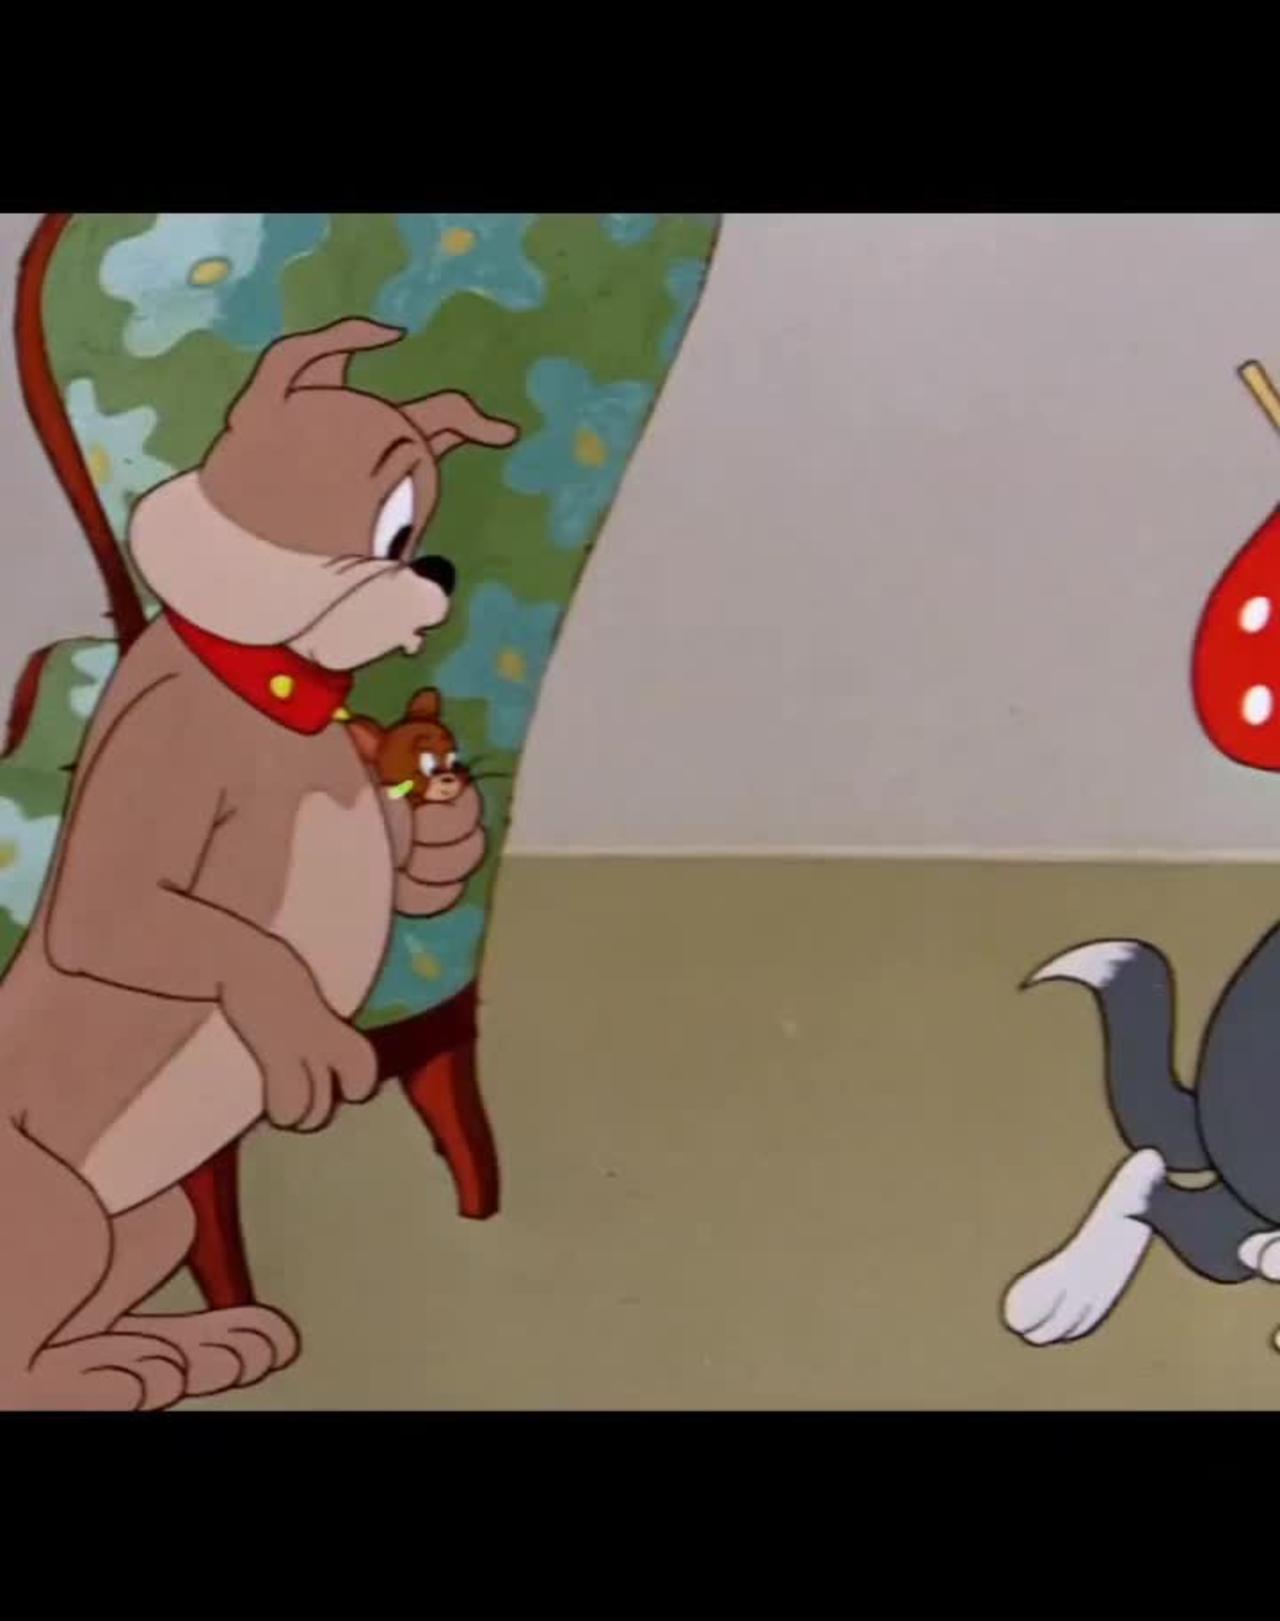 Tom and Jerry cartoon funny Video, kid's cartoon videos, cartoon funny Video